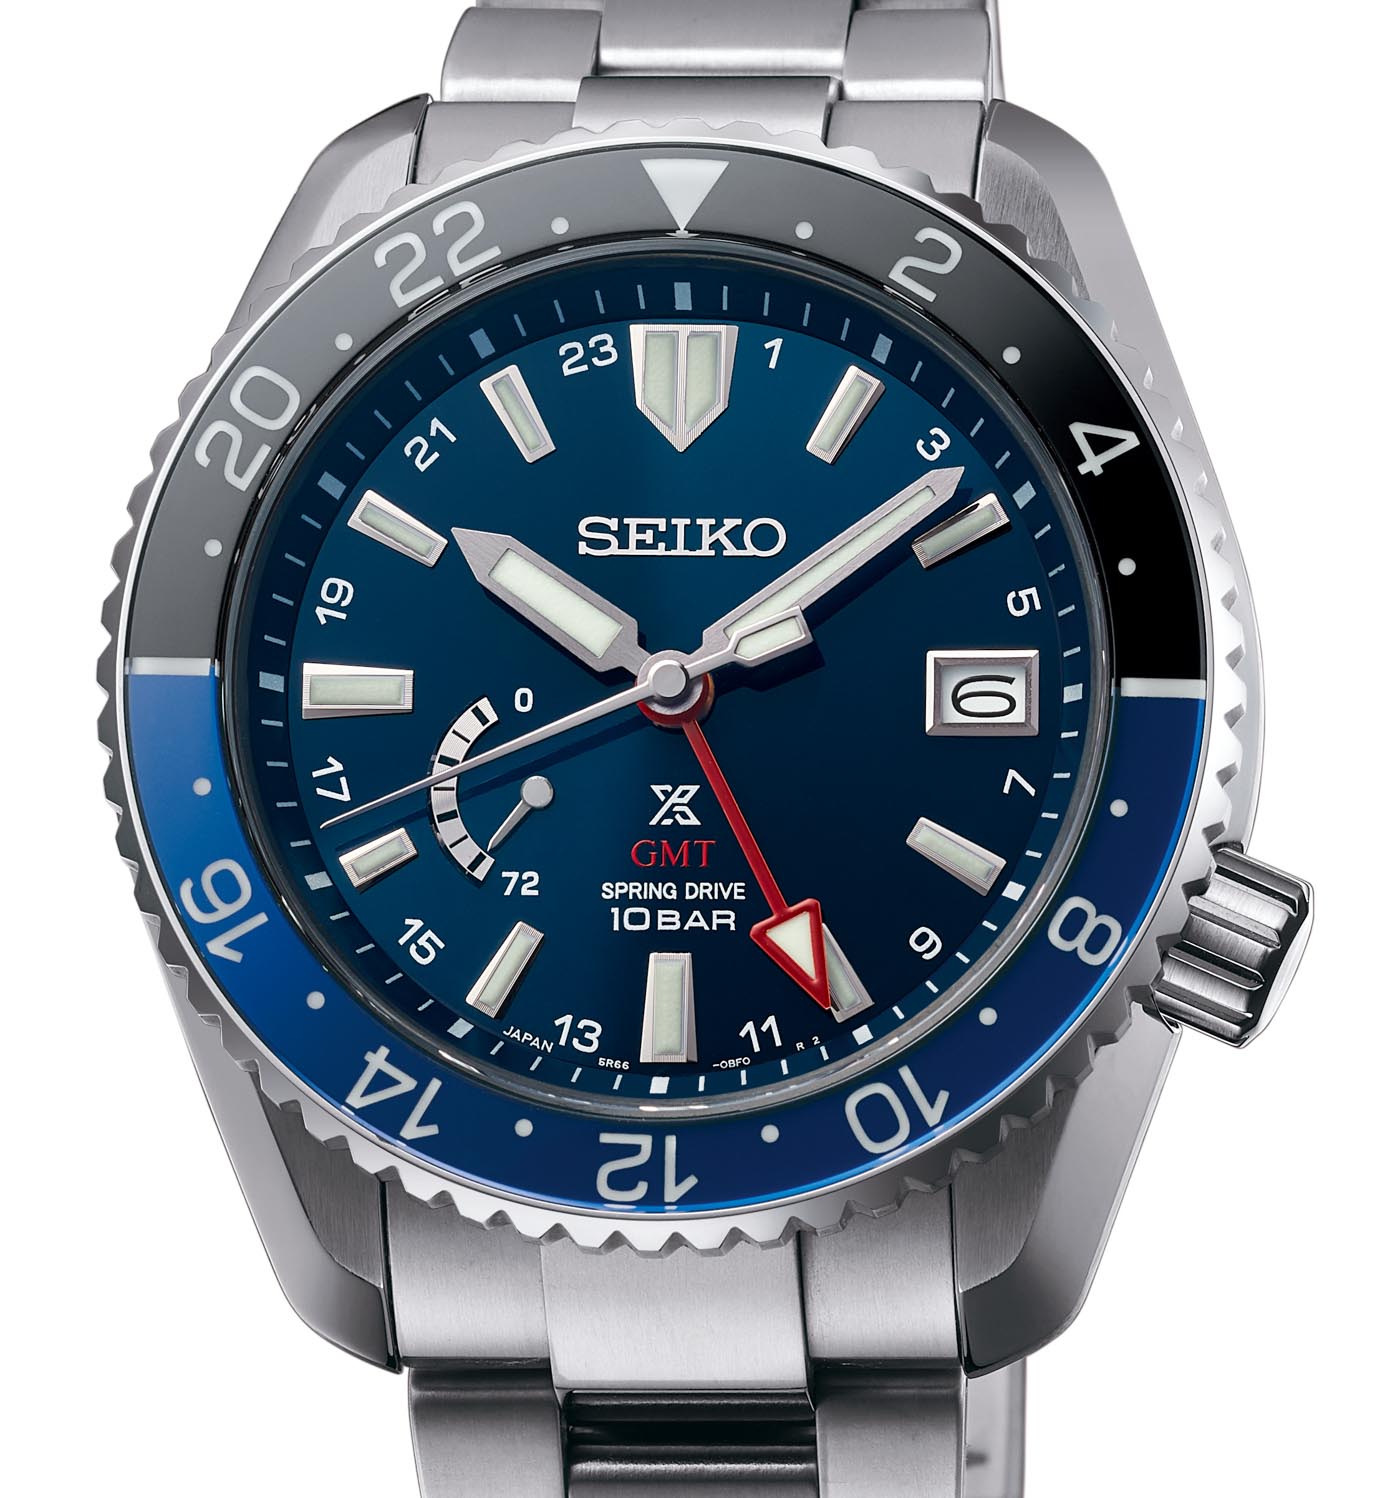 Seiko Prospex LX Collection With Spring Drive Movements For BaselWorld 2019